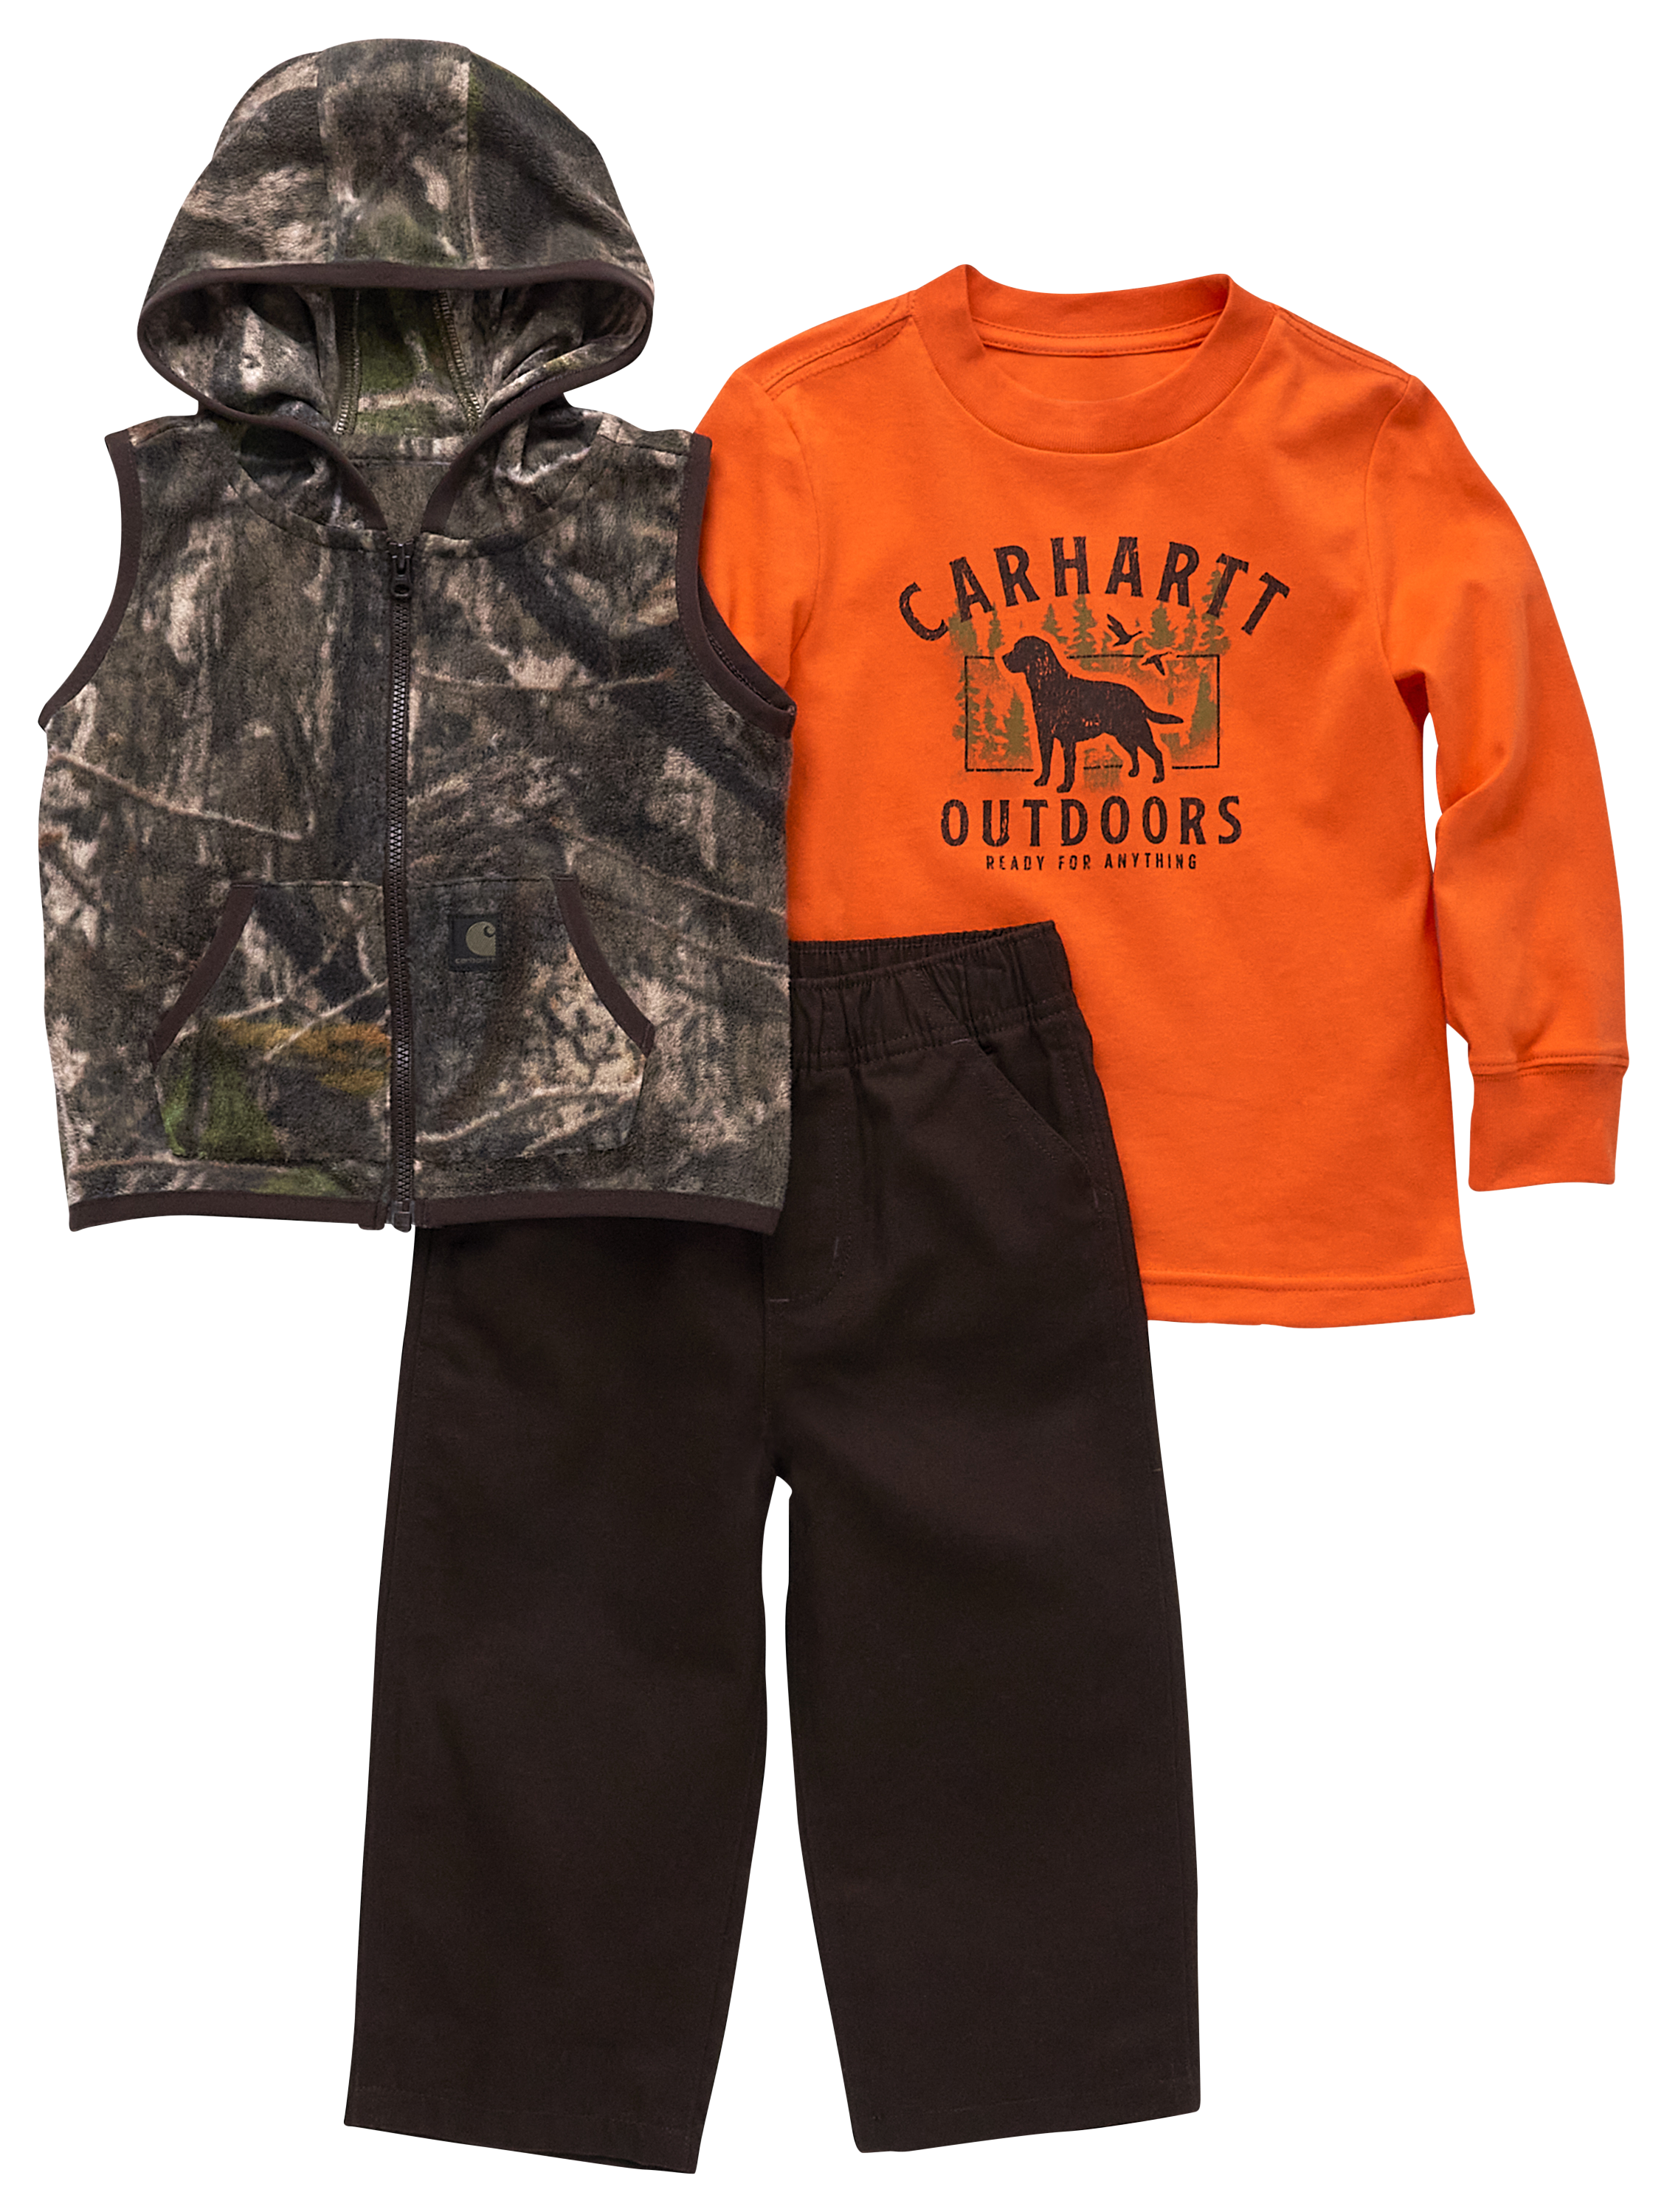 Carhartt Long-Sleeve T-Shirt, Camo Vest, and Canvas Pants 3-Piece Set for Babies - Mossy Oak Country DNA - 12 Months